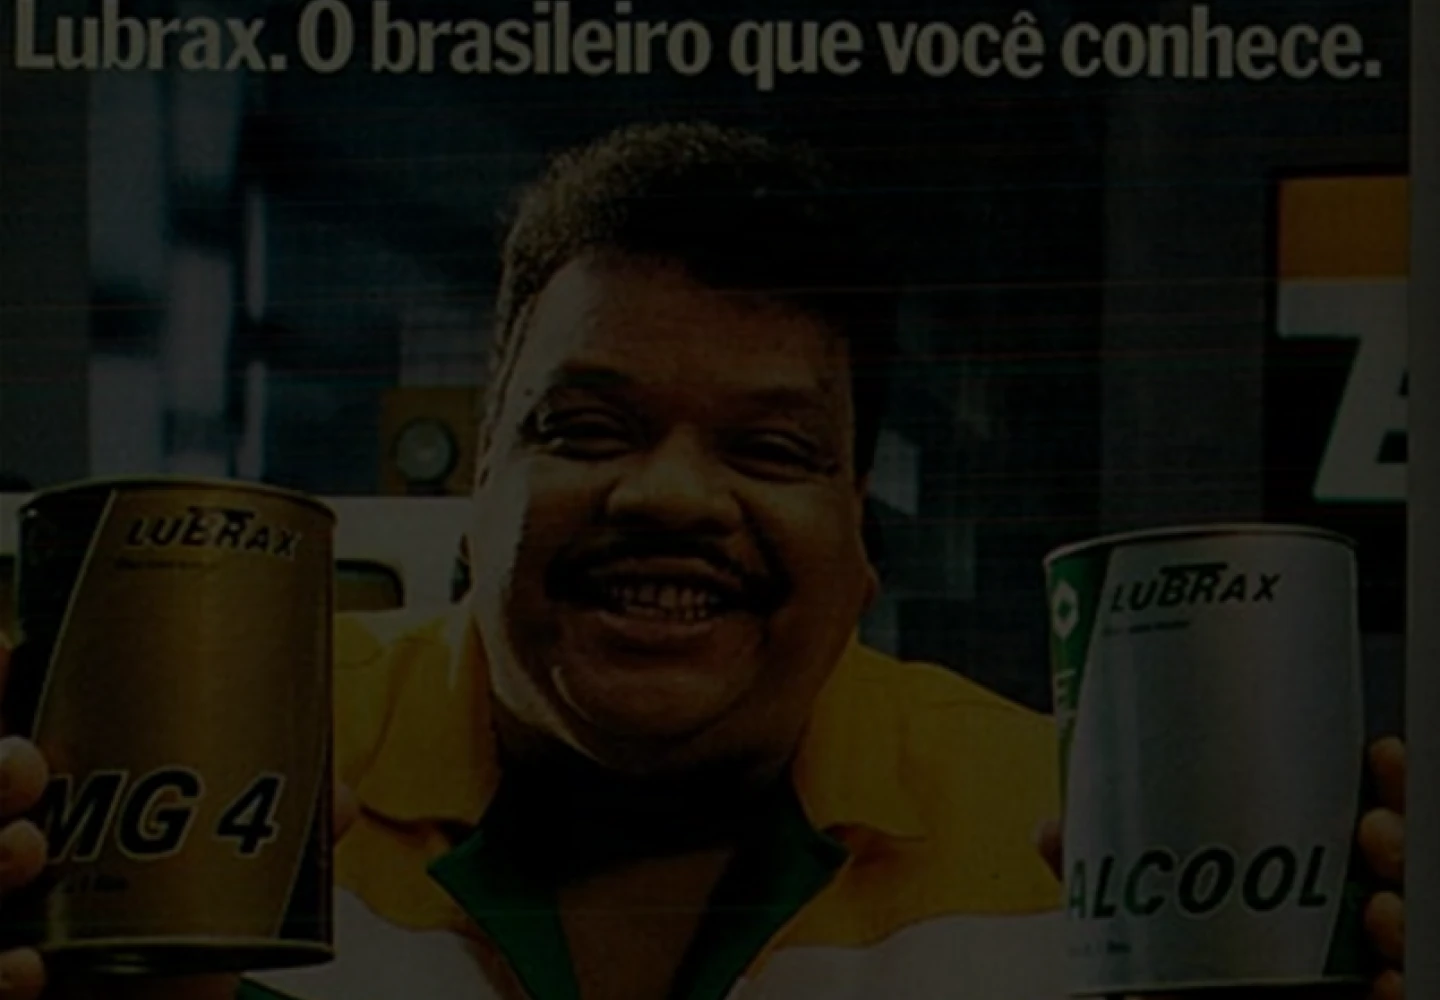 Magazine advertisement of the Lubrax line with singer Tim Maia as the face of the brand. The title is “Lubrax: The Brazilian citizen you know.”